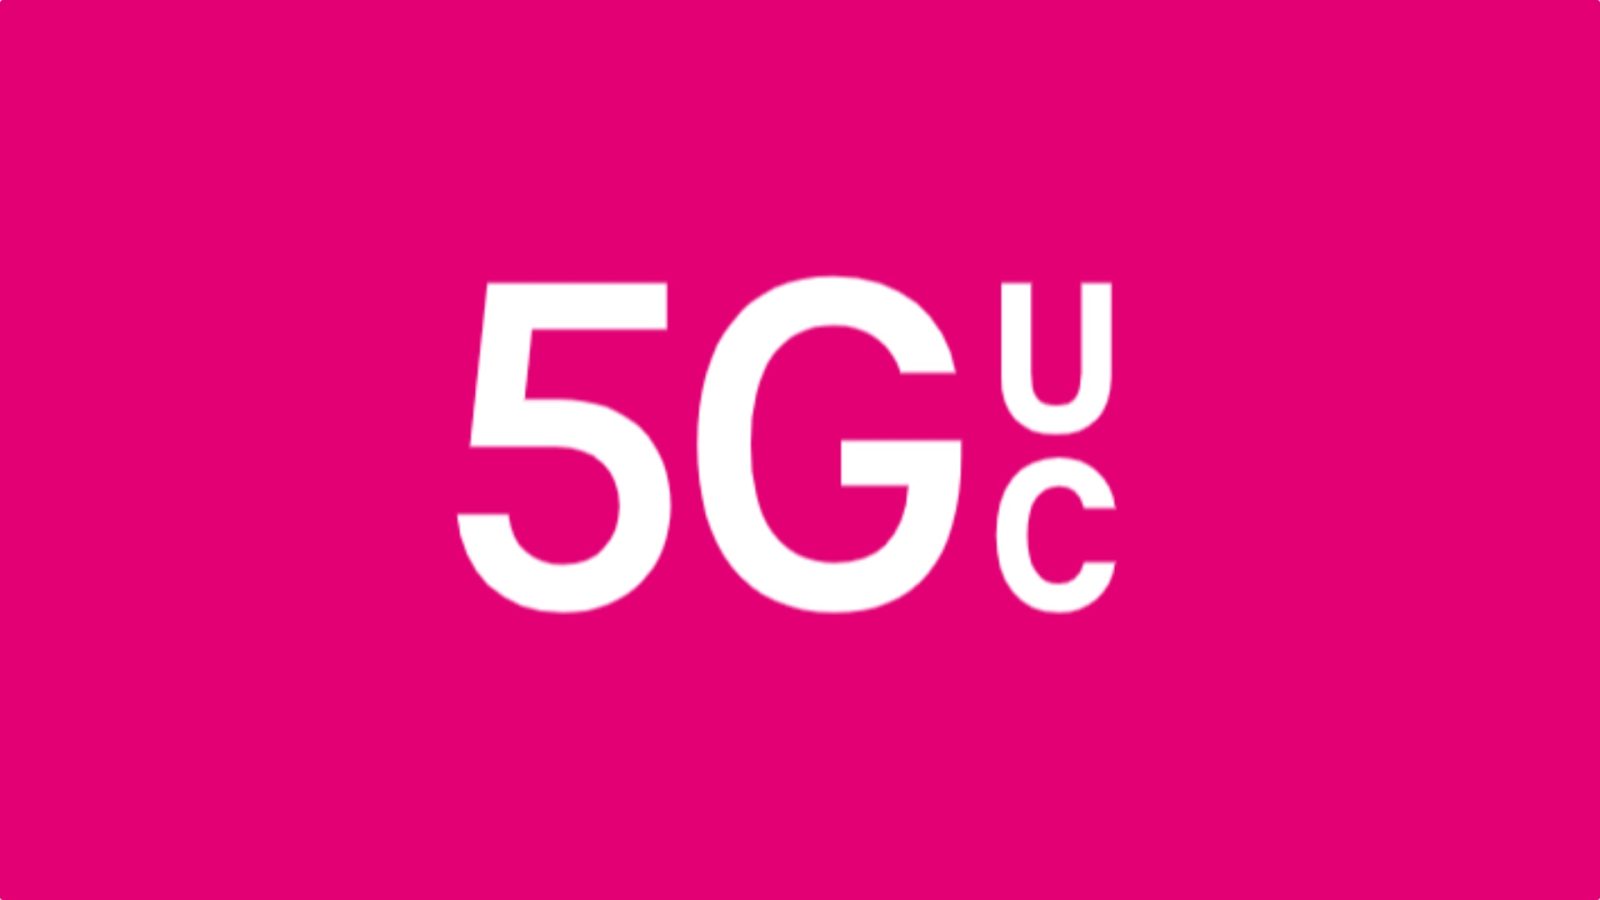 T-Mobile 5G UC